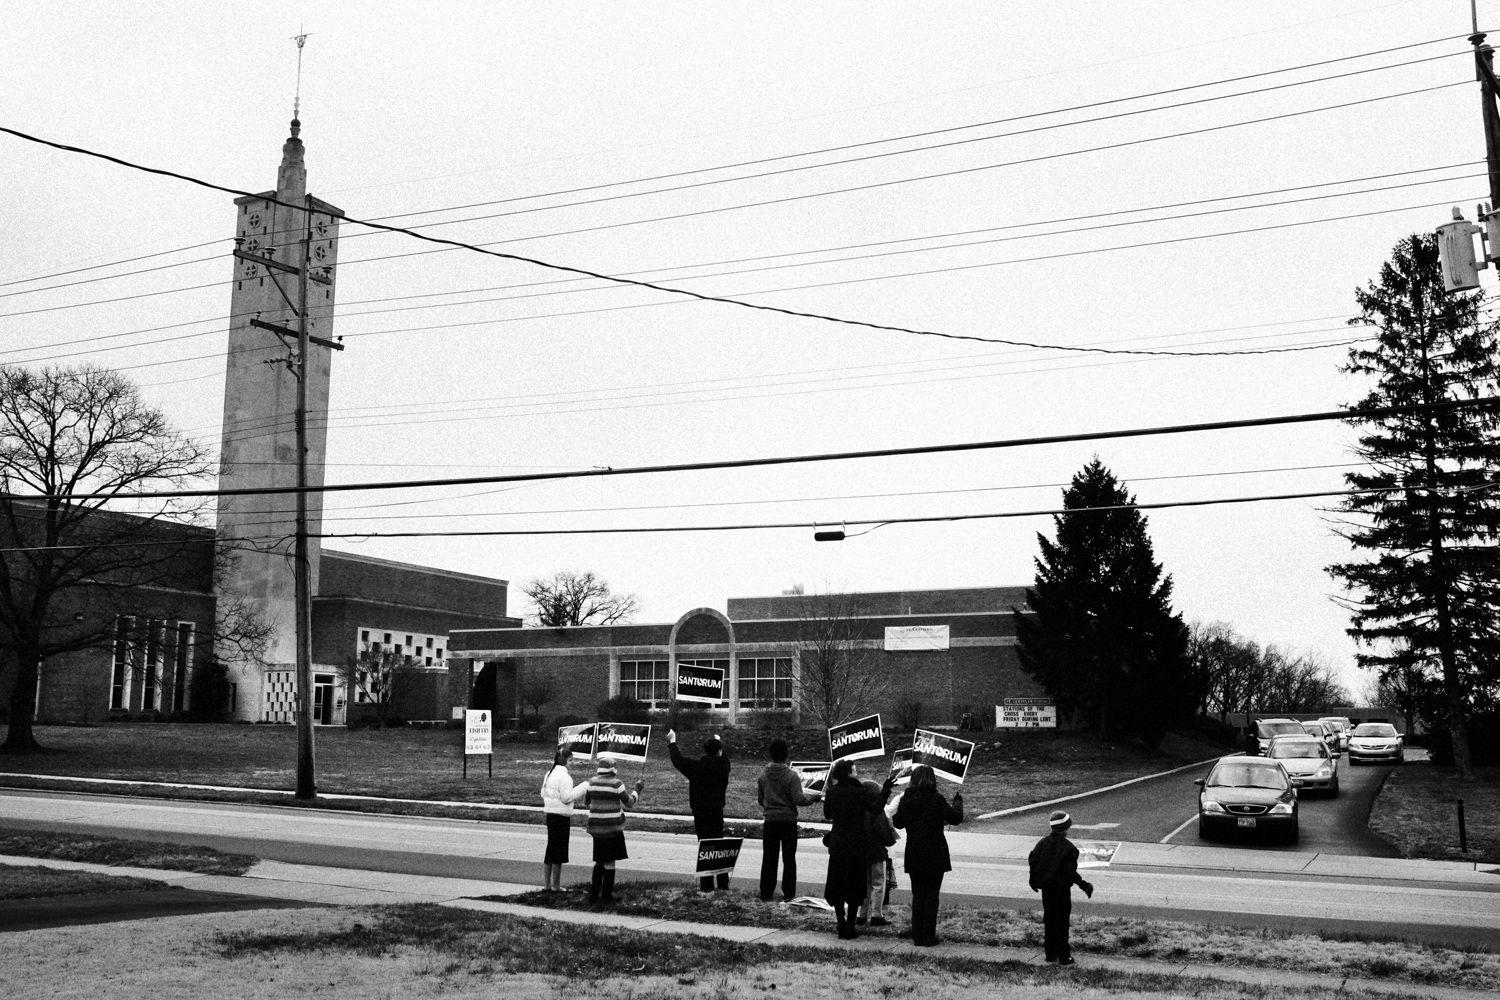 March 4, 2012. Volunteers for the Rick Santorum campaign hold signs in front of St. Gertrude Church after Sunday services in Madeira, Ohio.